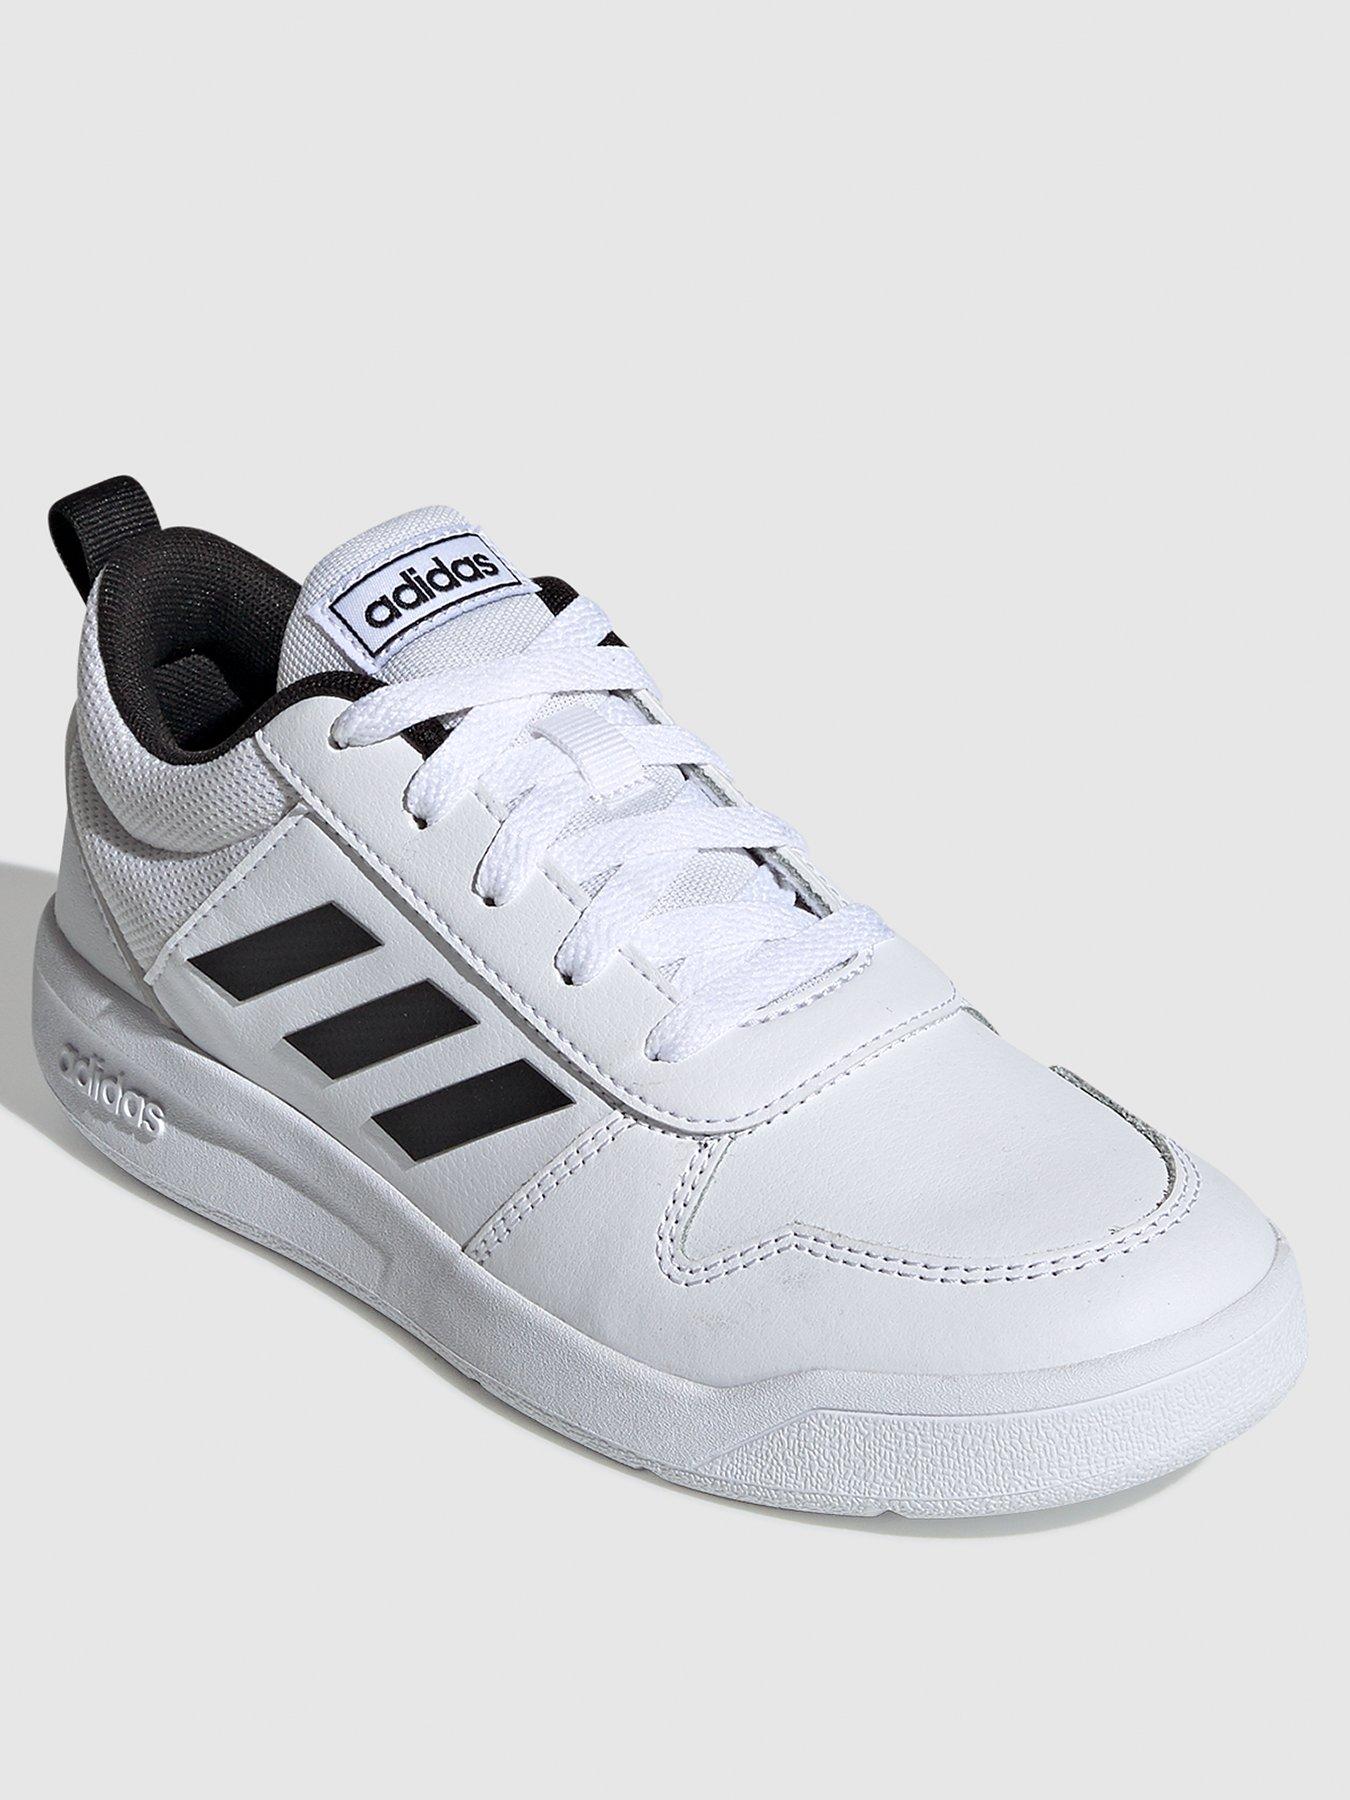 black and white adidas trainers junior